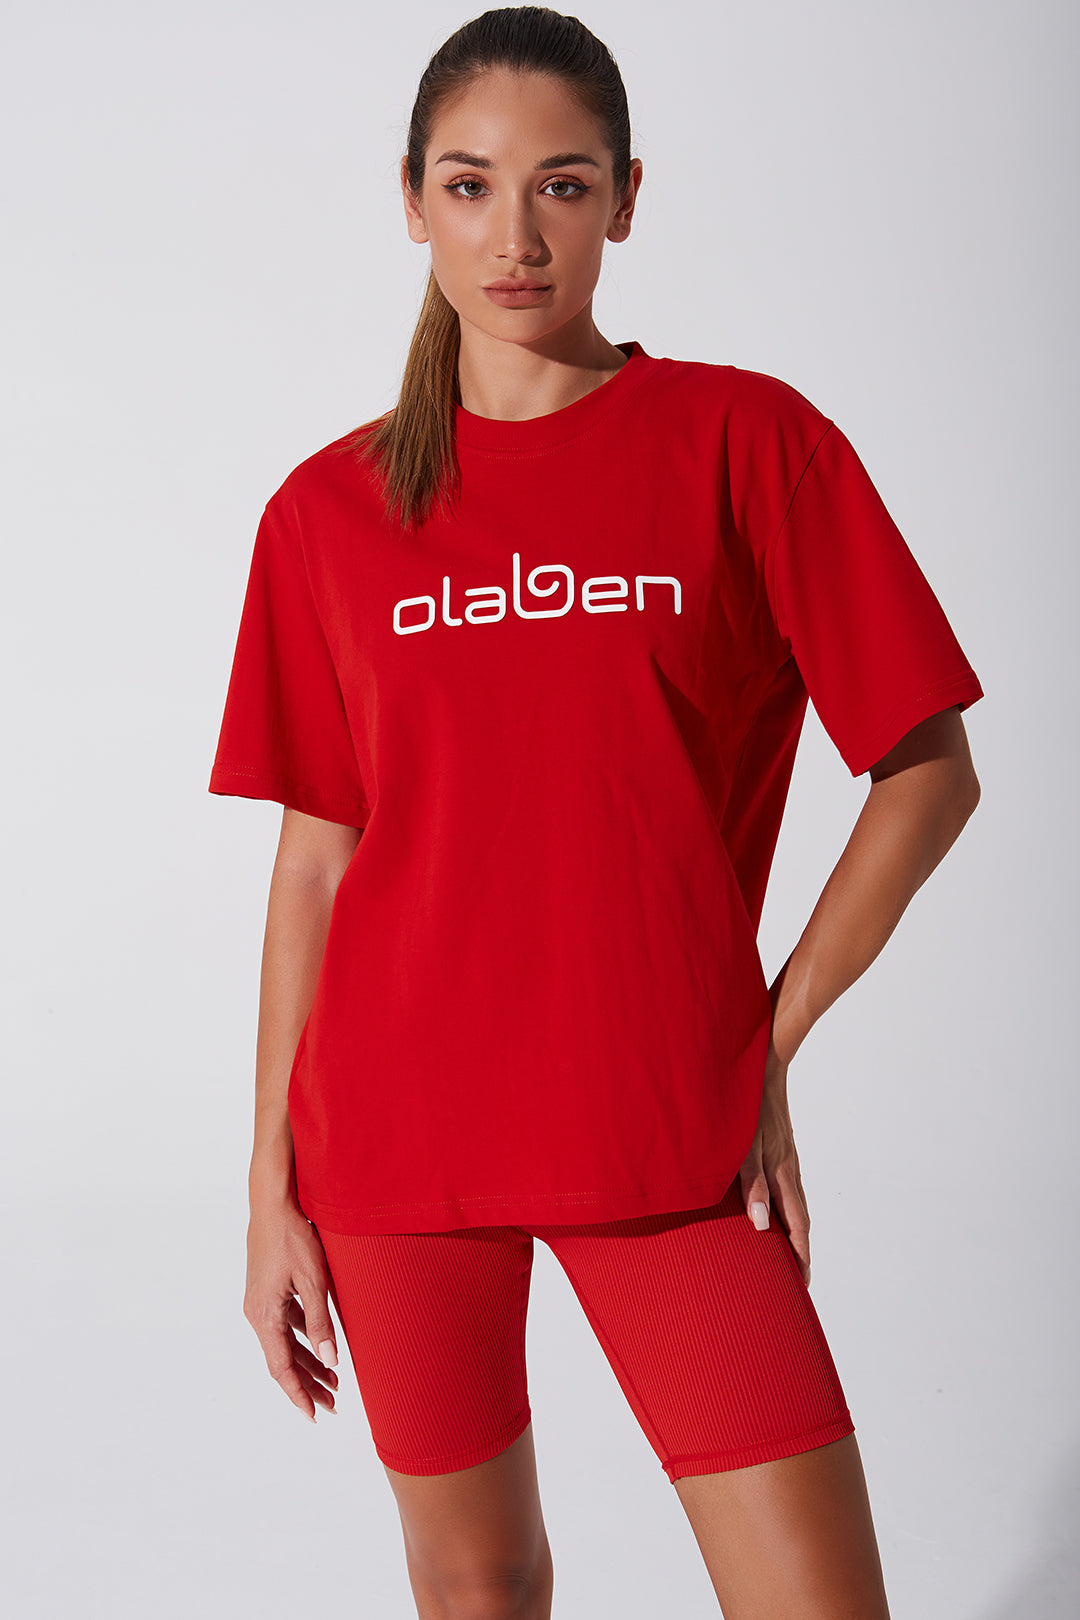 Stylish unisex red tee with short sleeves, perfect for women's casual wear - OW-0173-WSS-RD.